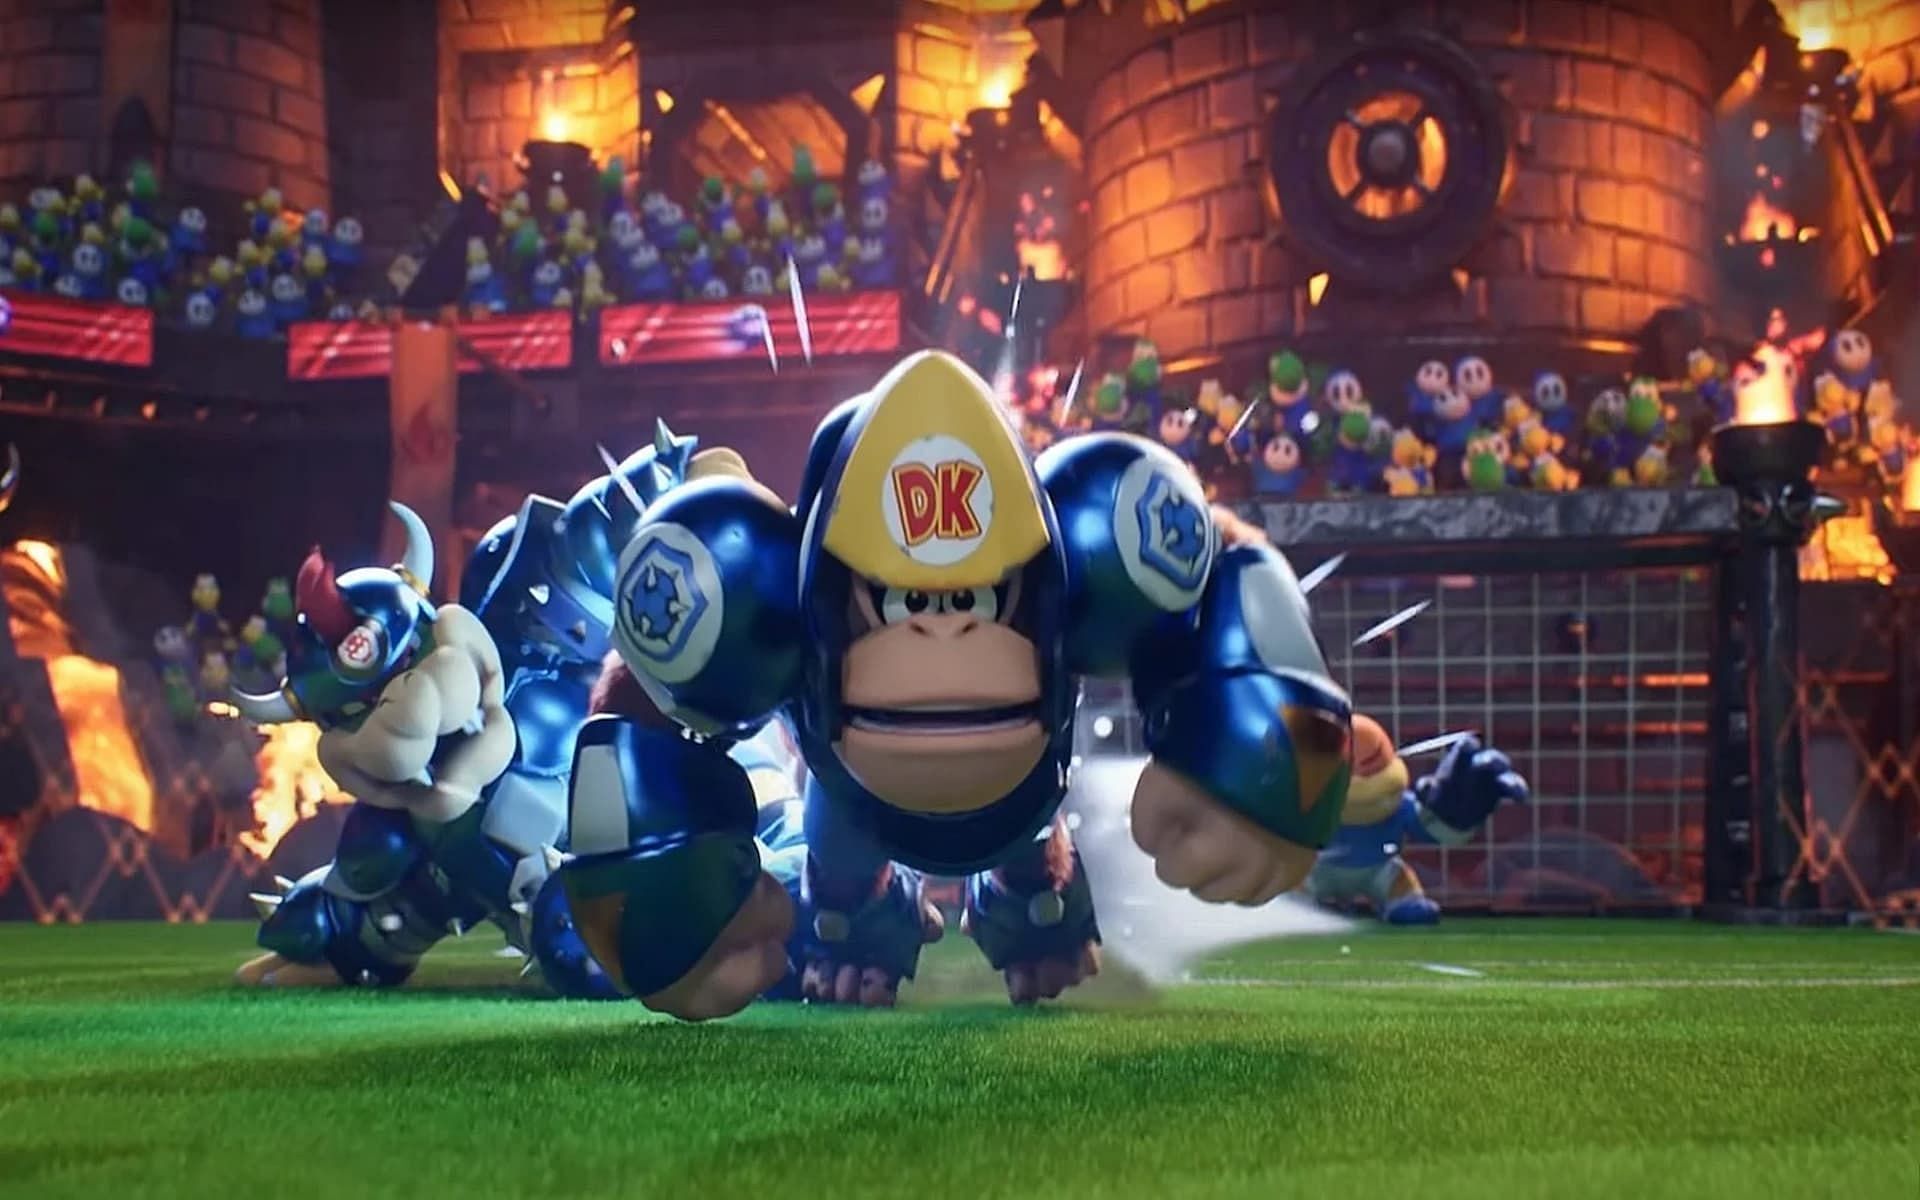 Donkey Kong is a rock-solid defensive character in Mario Strikers: Battle League (Image via Nintendo)